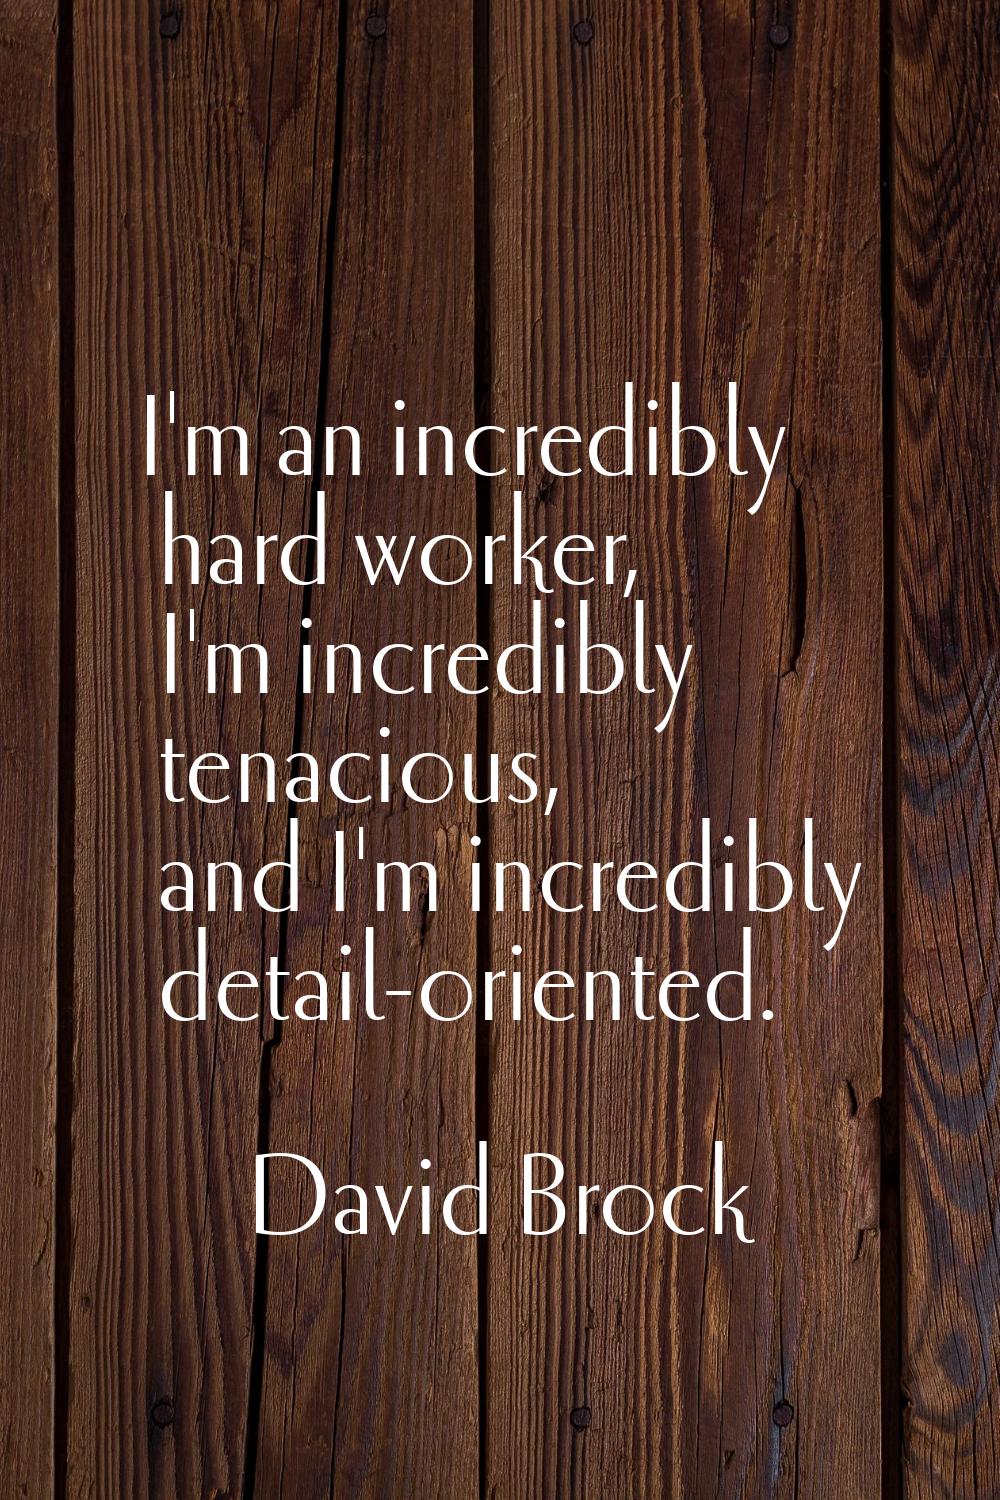 I'm an incredibly hard worker, I'm incredibly tenacious, and I'm incredibly detail-oriented.